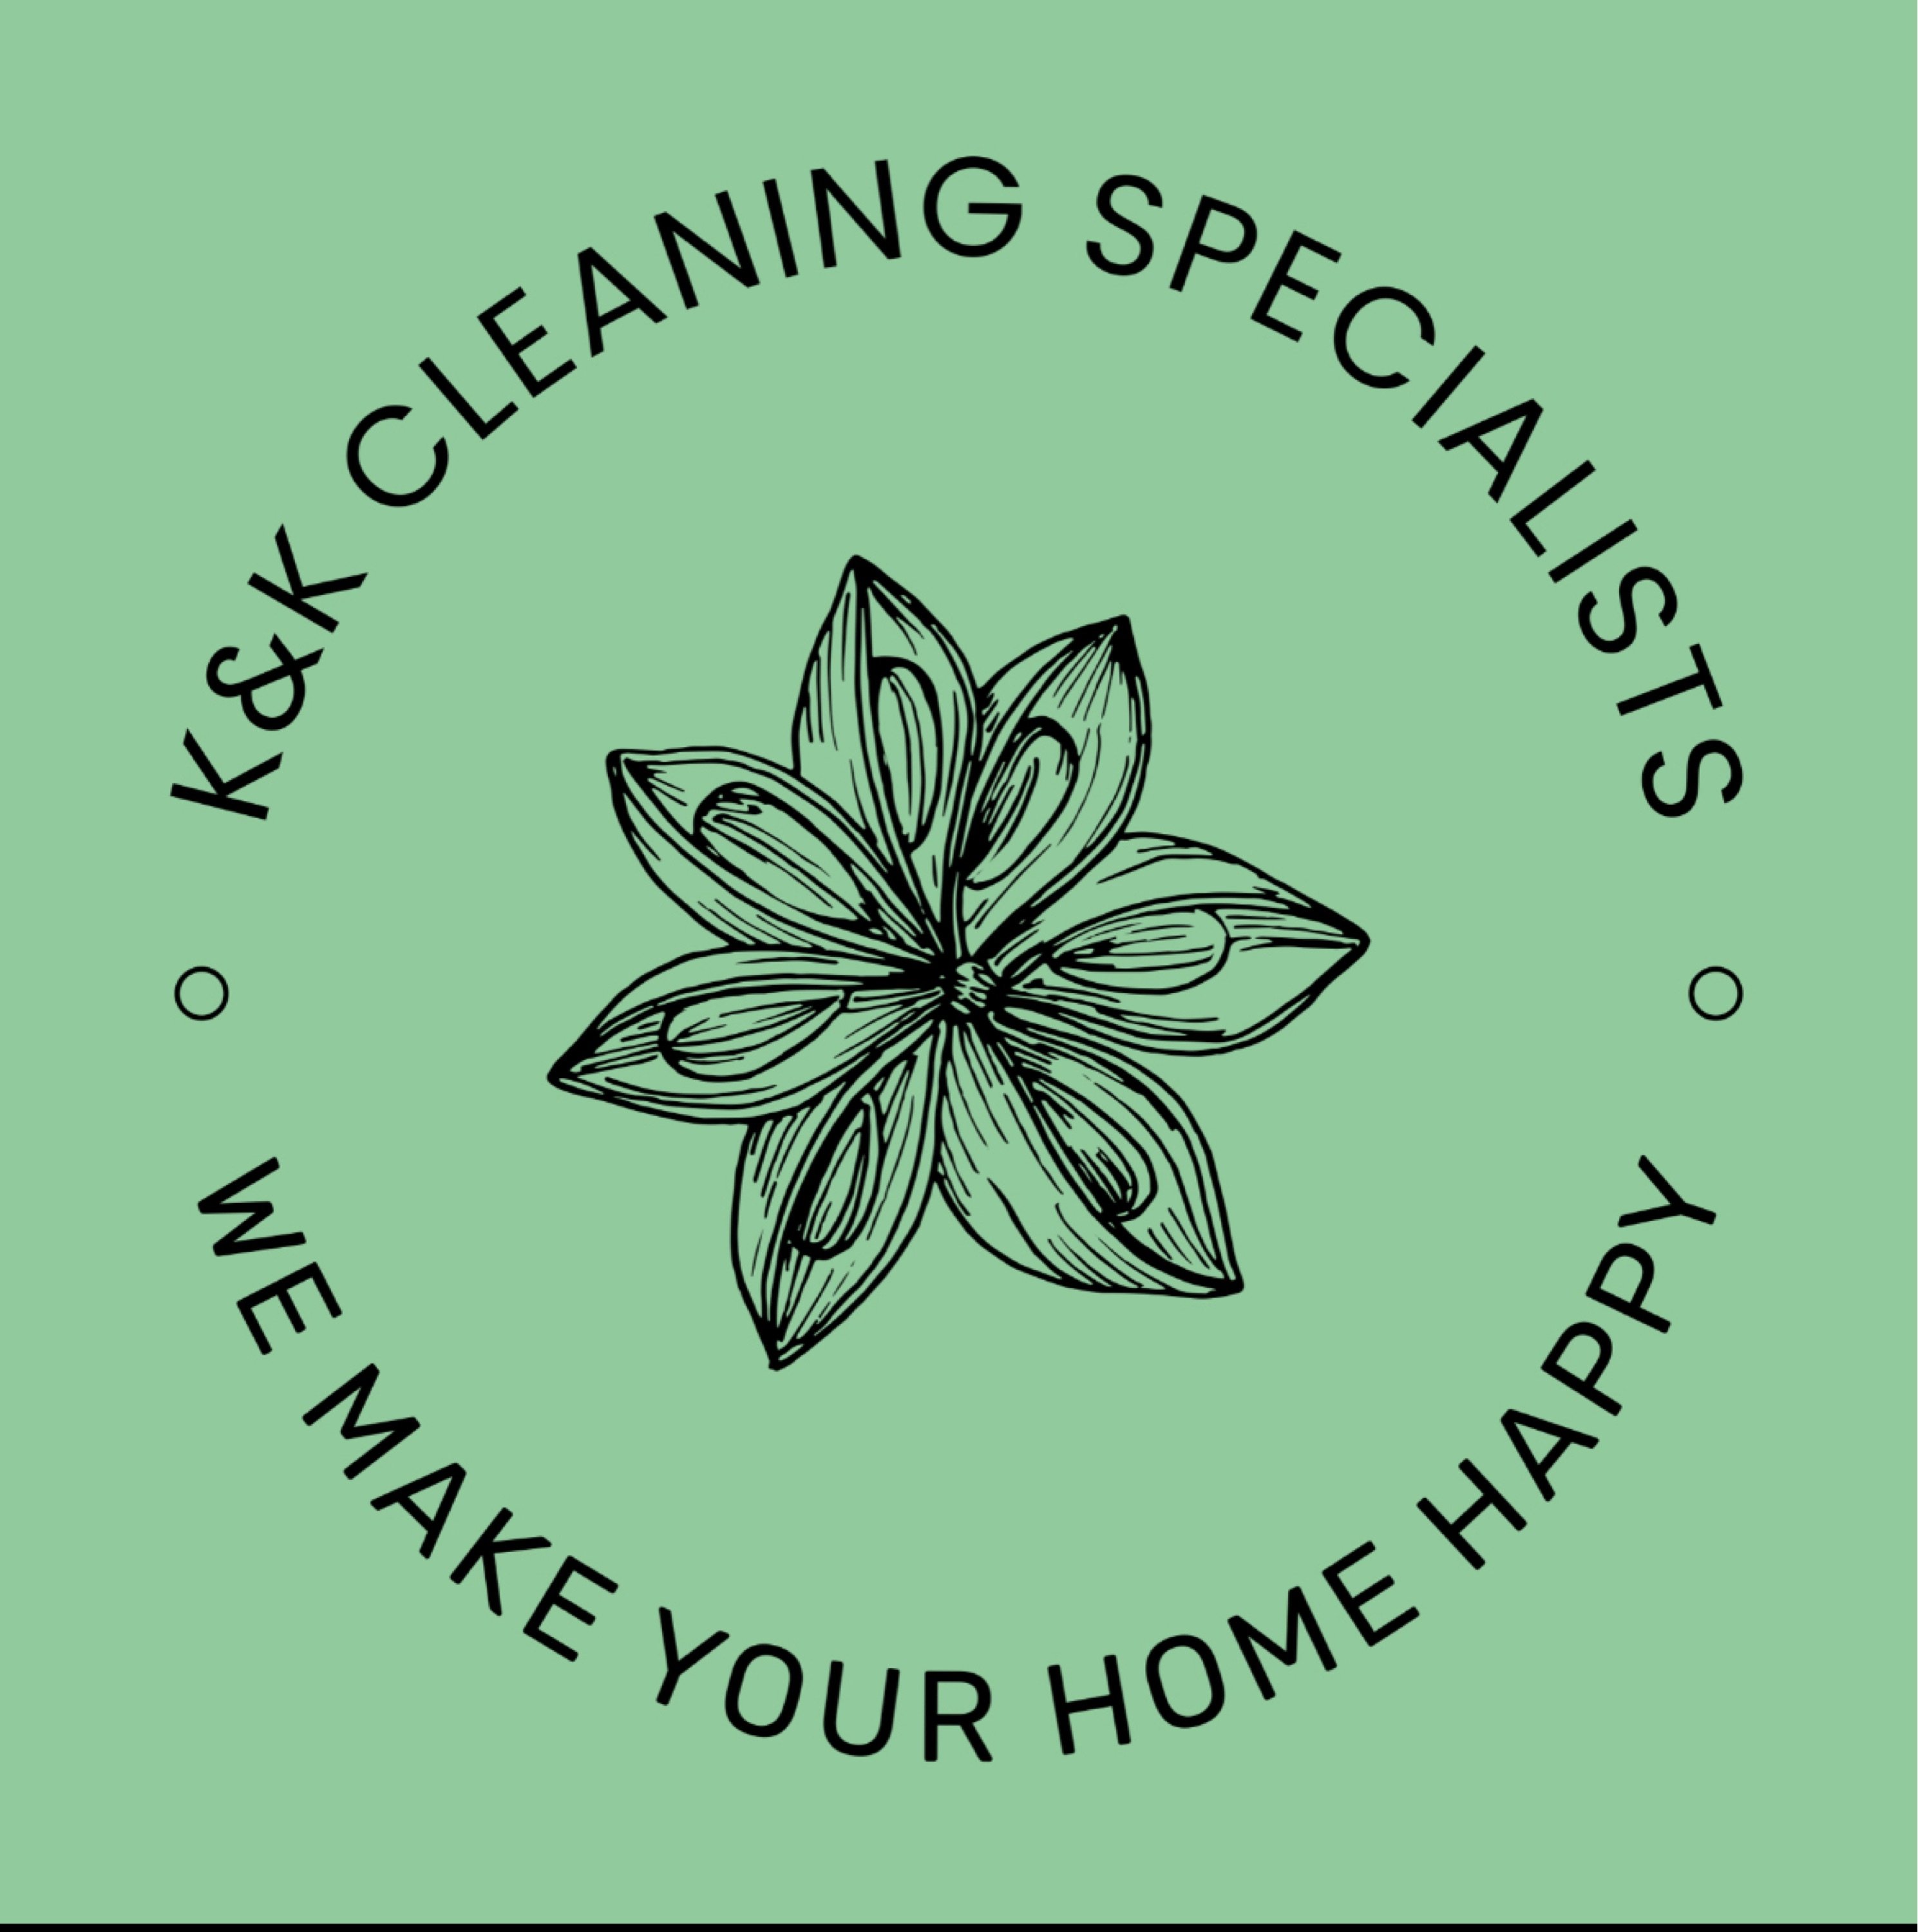 K & K Cleaning Specialists Logo